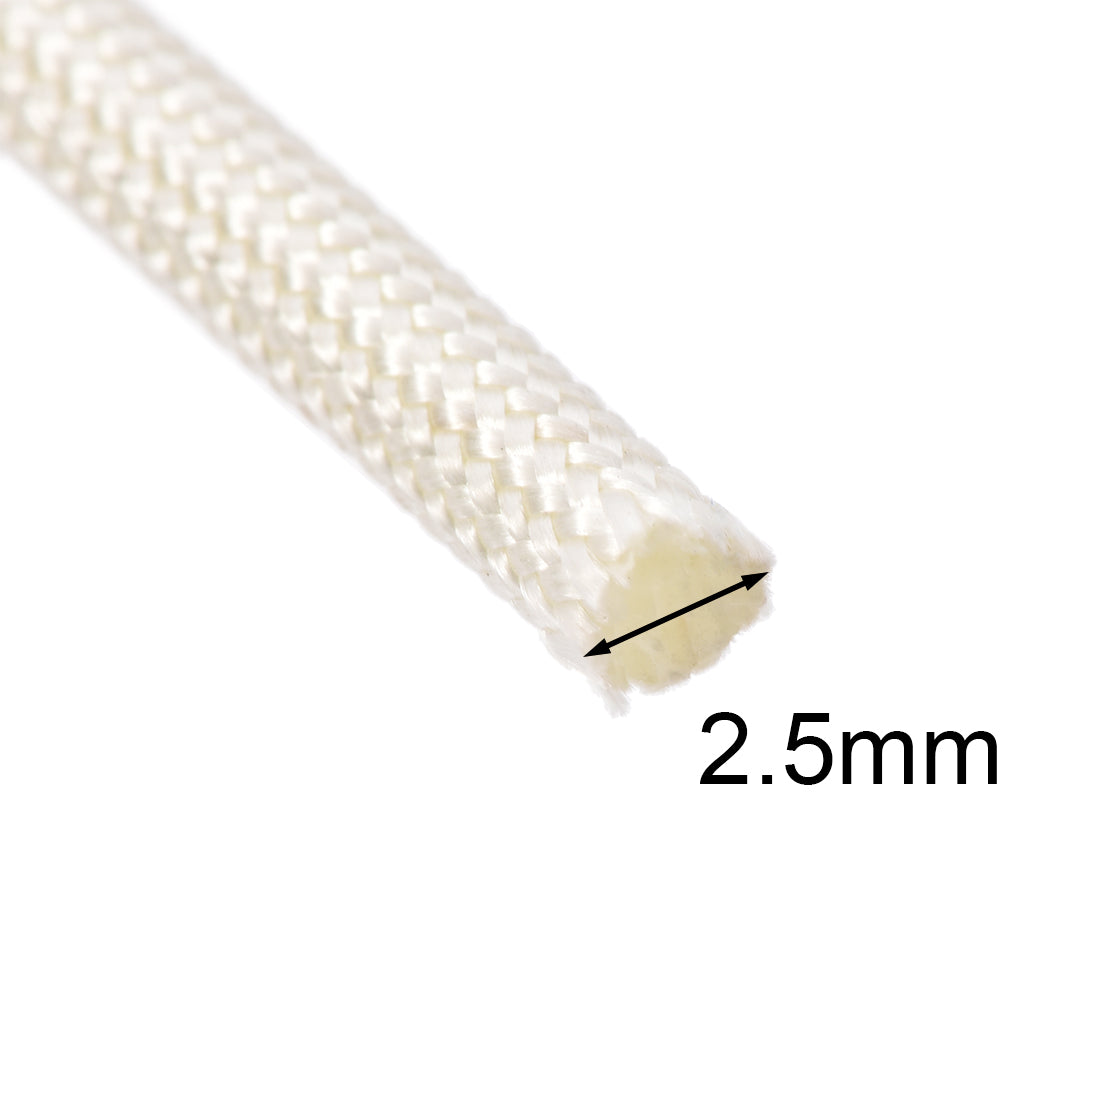 uxcell Uxcell Insulation Cable Protector, 9.8Ft-2.5mm High TEMP Fiberglass Sleeve White